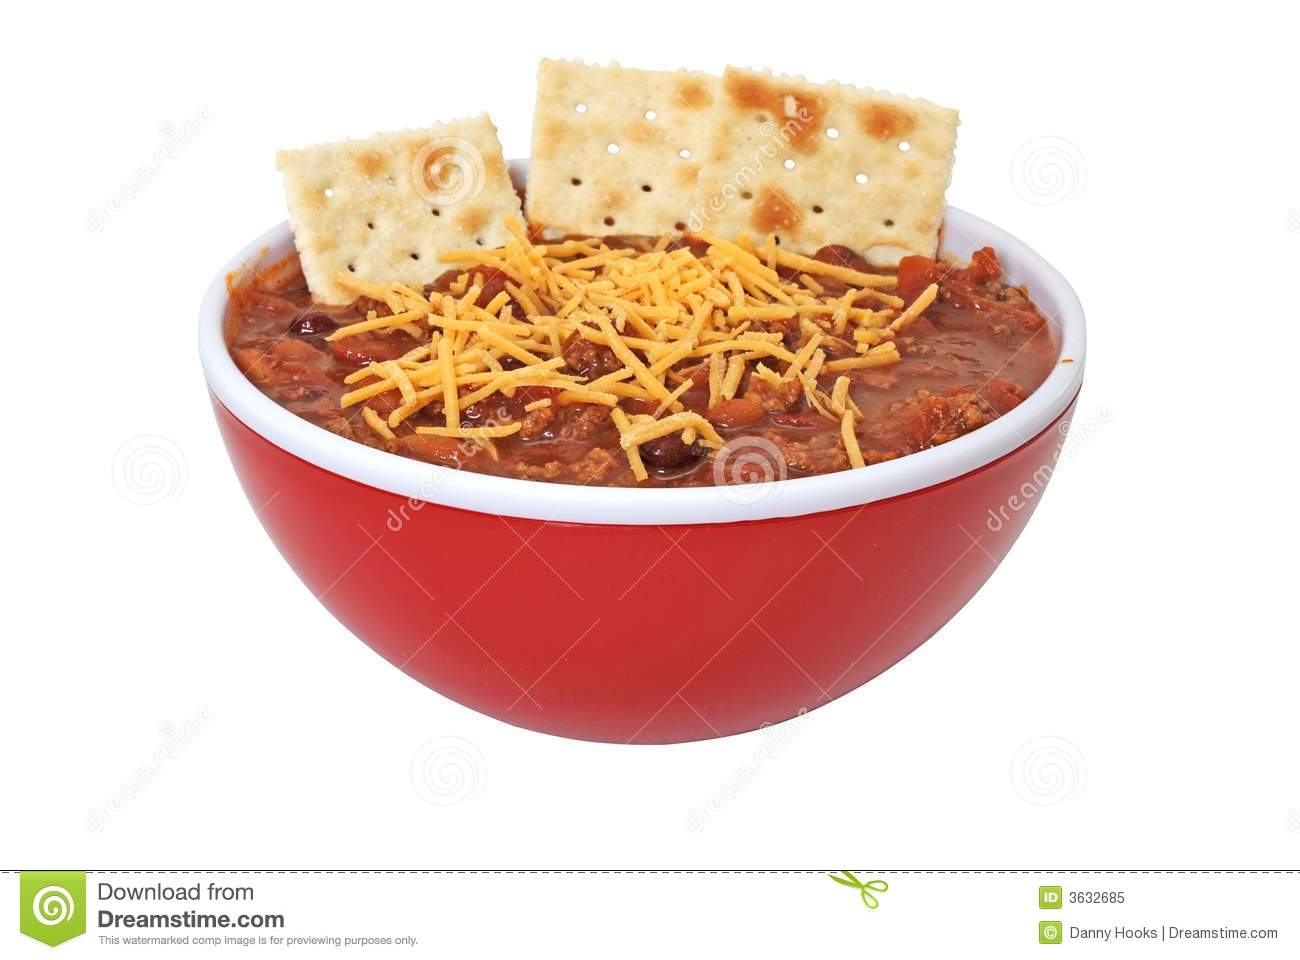 Bowl Of Hot Chili With Beans Cheese And Crackers  Isolated On White